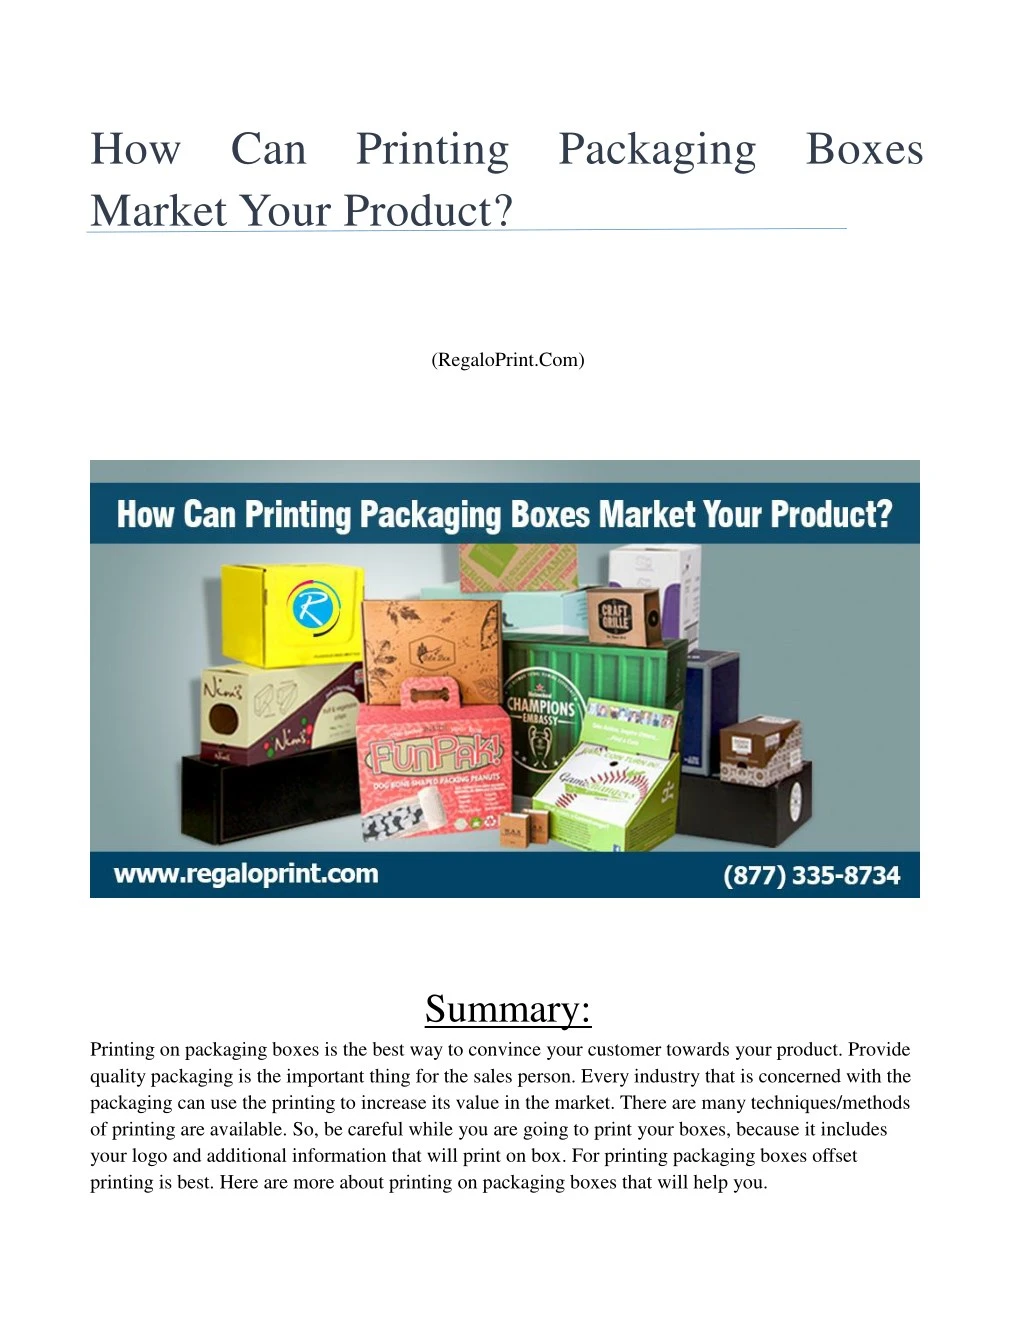 how can printing packaging boxes market your